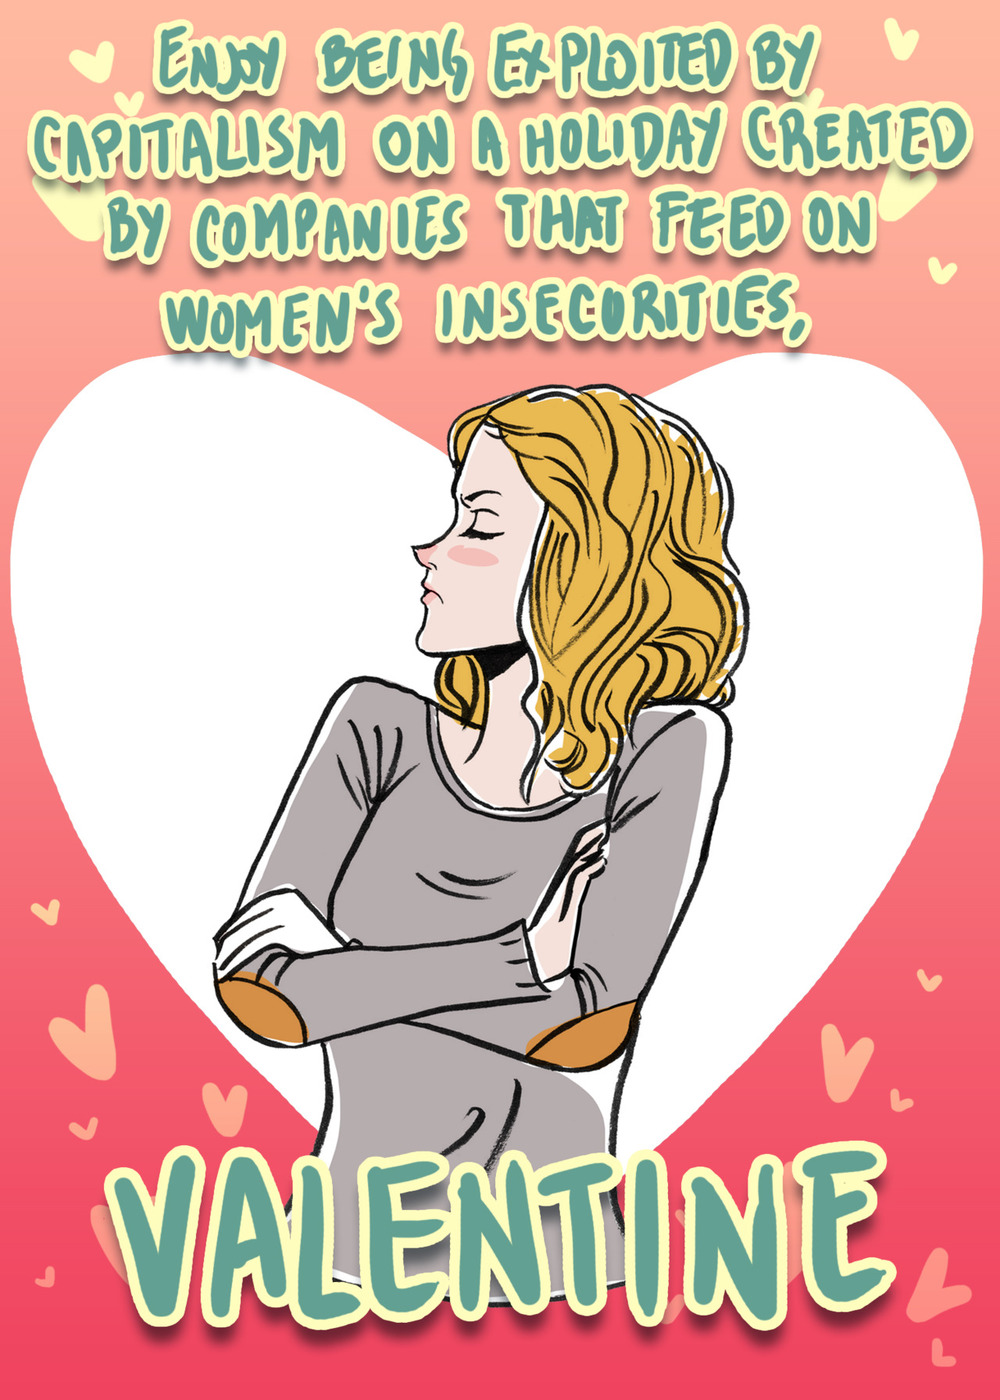 Funny COMMUNITY Themed Valentine's Day Cards — GeekTyrant